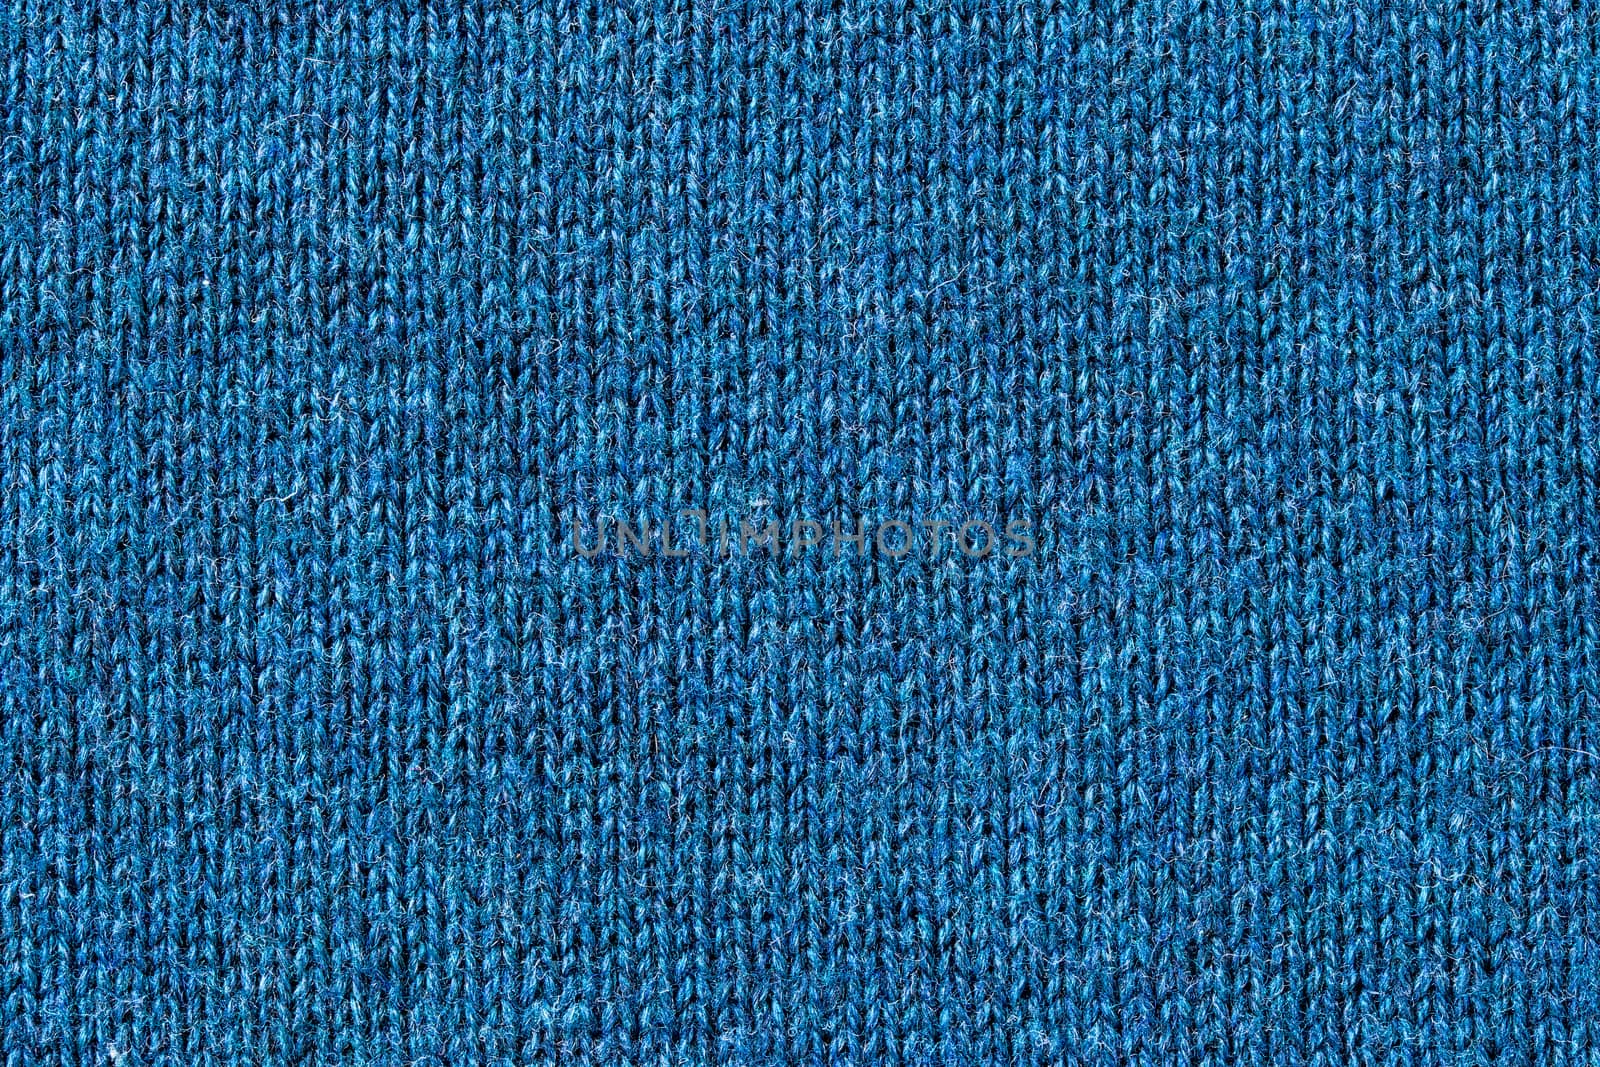 Texture of blue cloth. Abstract background for design.